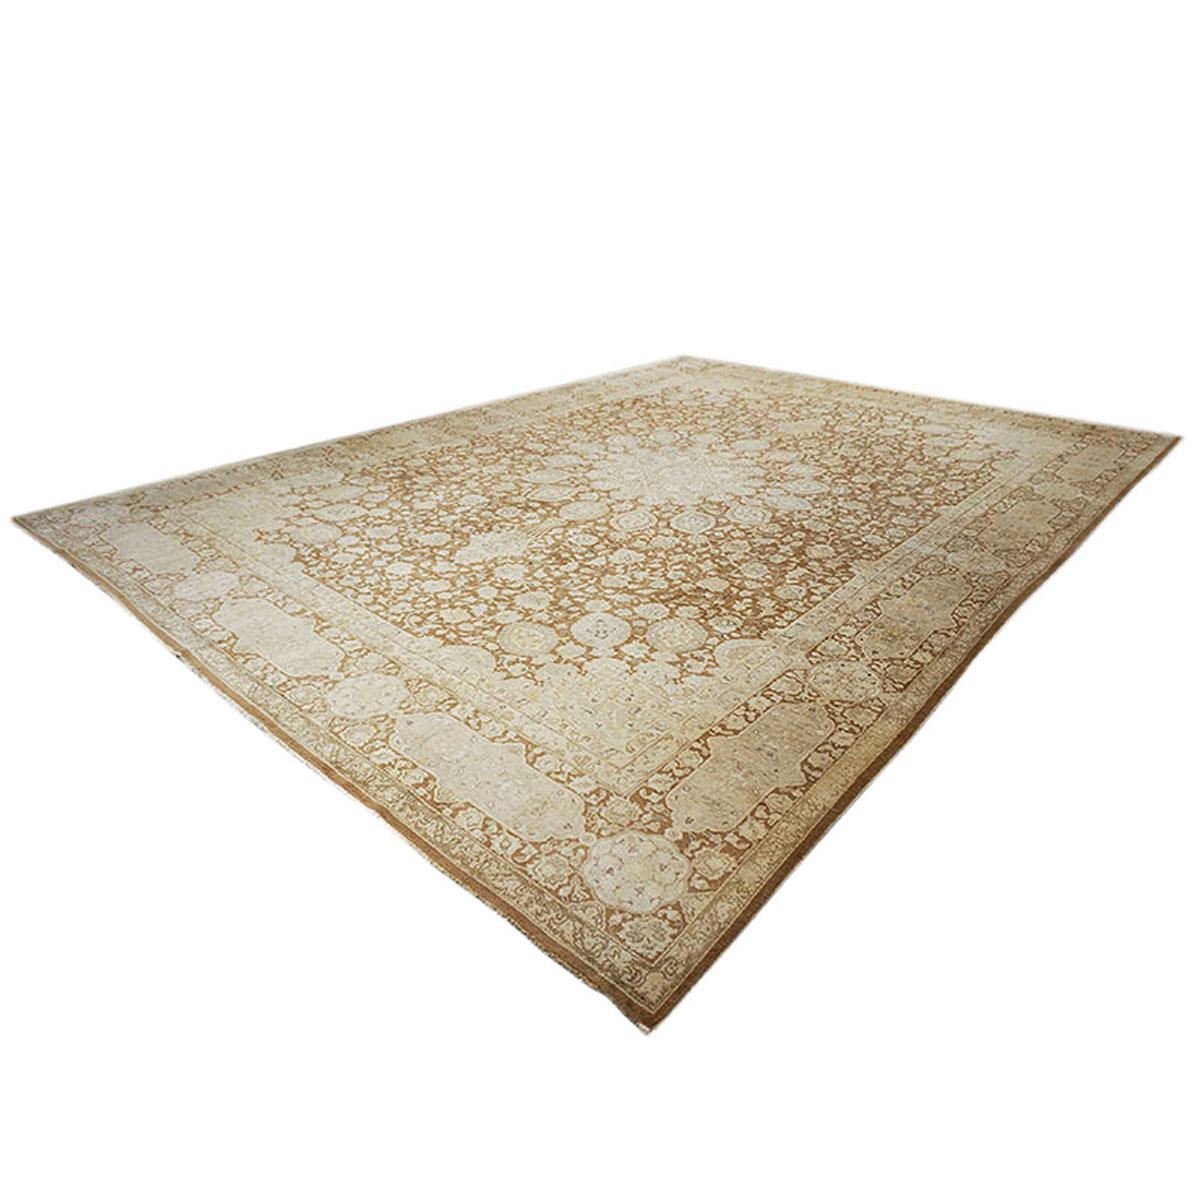 Mid-20th Century Antique 1940s Persian Tabriz 10x13 Tan, Brown, & Ivory Handmade Area Rug For Sale